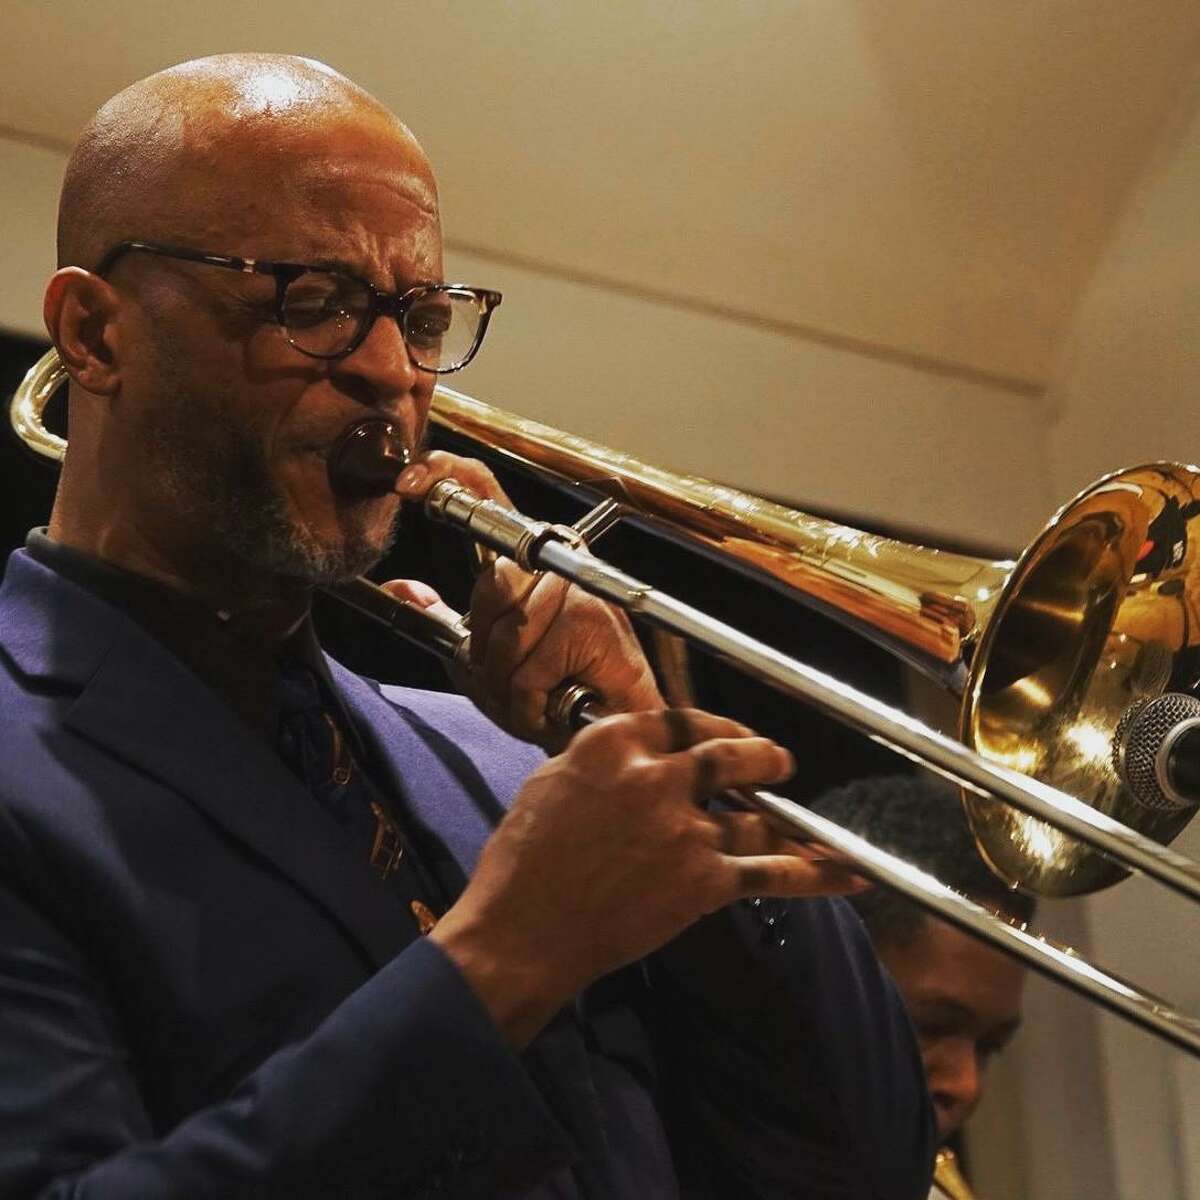 An accomplished trombonist who grew up in San Antonio, Ron Wilkins, was in an induced coma for 32 days after falling ill with COVID-19 in early April.